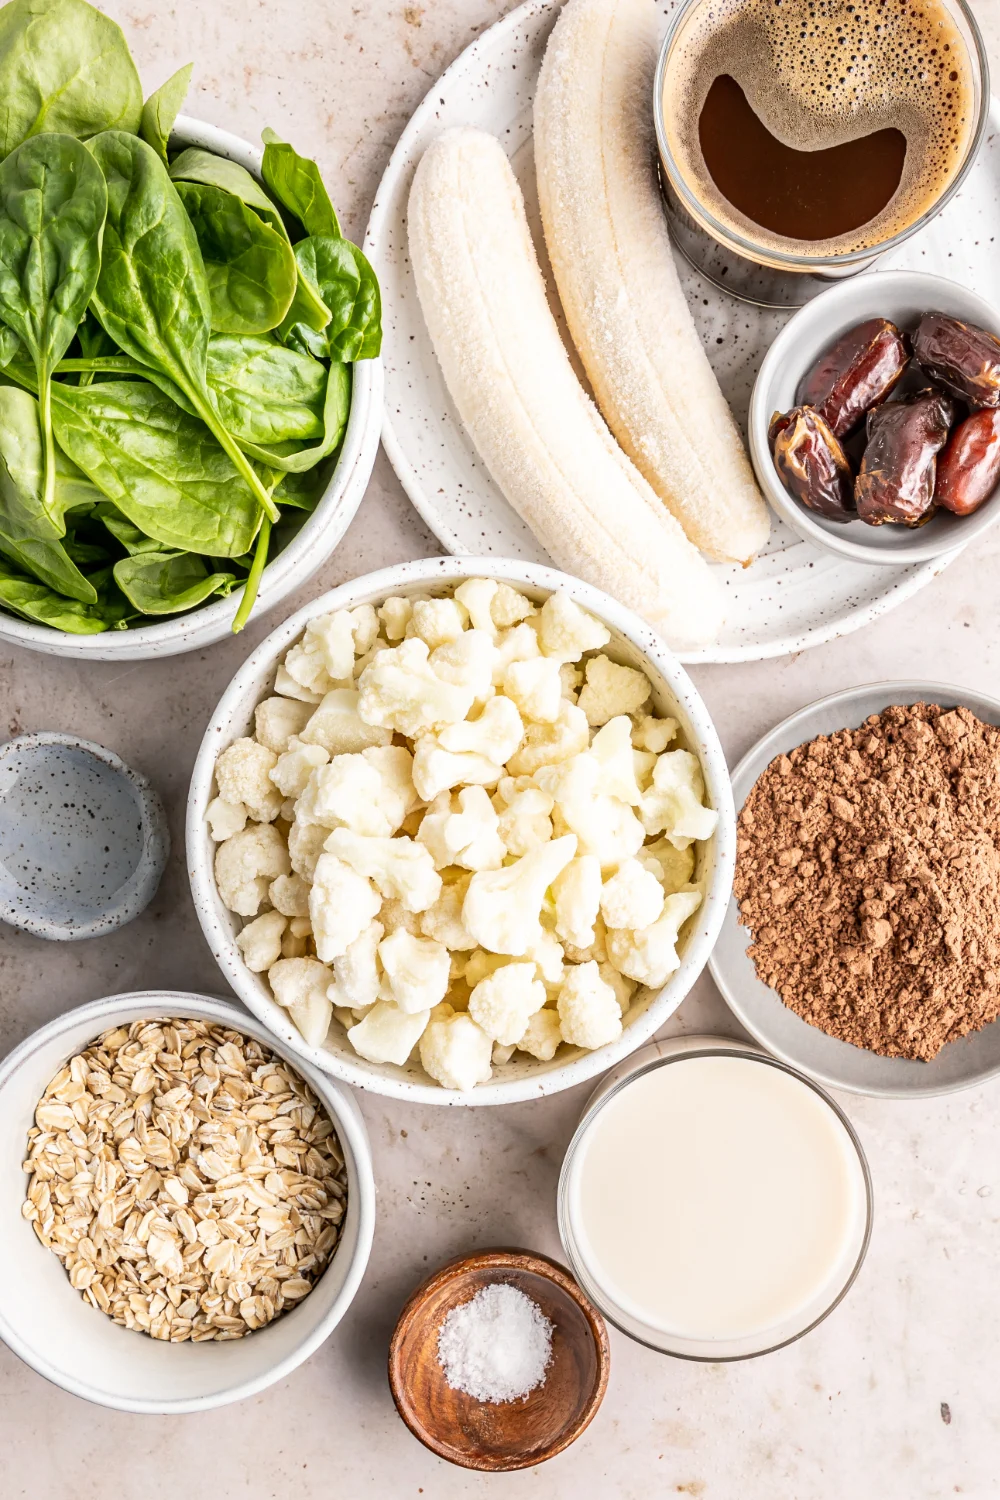 Mint, bananas, cauliflower, and other ingredients for a smoothie in bowls. 